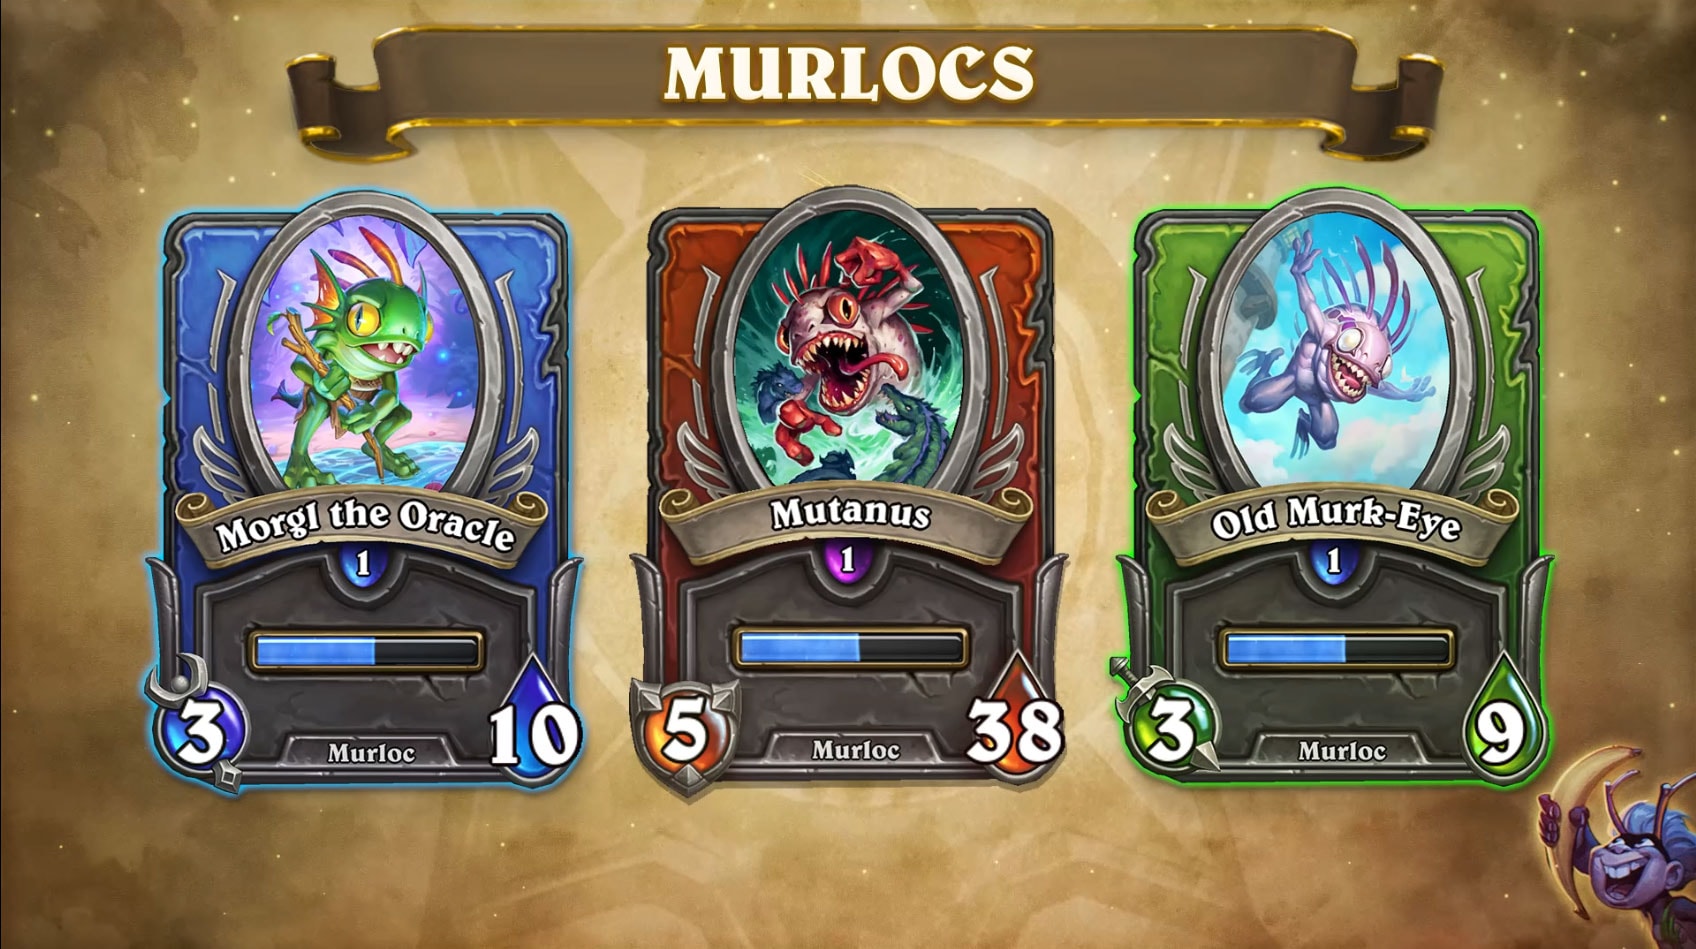 Murlocs are an example of a minion-type synergy. Morgl the oracle, Mutanus, and old-Murk eye are shown as caster, protector, and fighter respectively (all stats shown on Mercs today are not final).